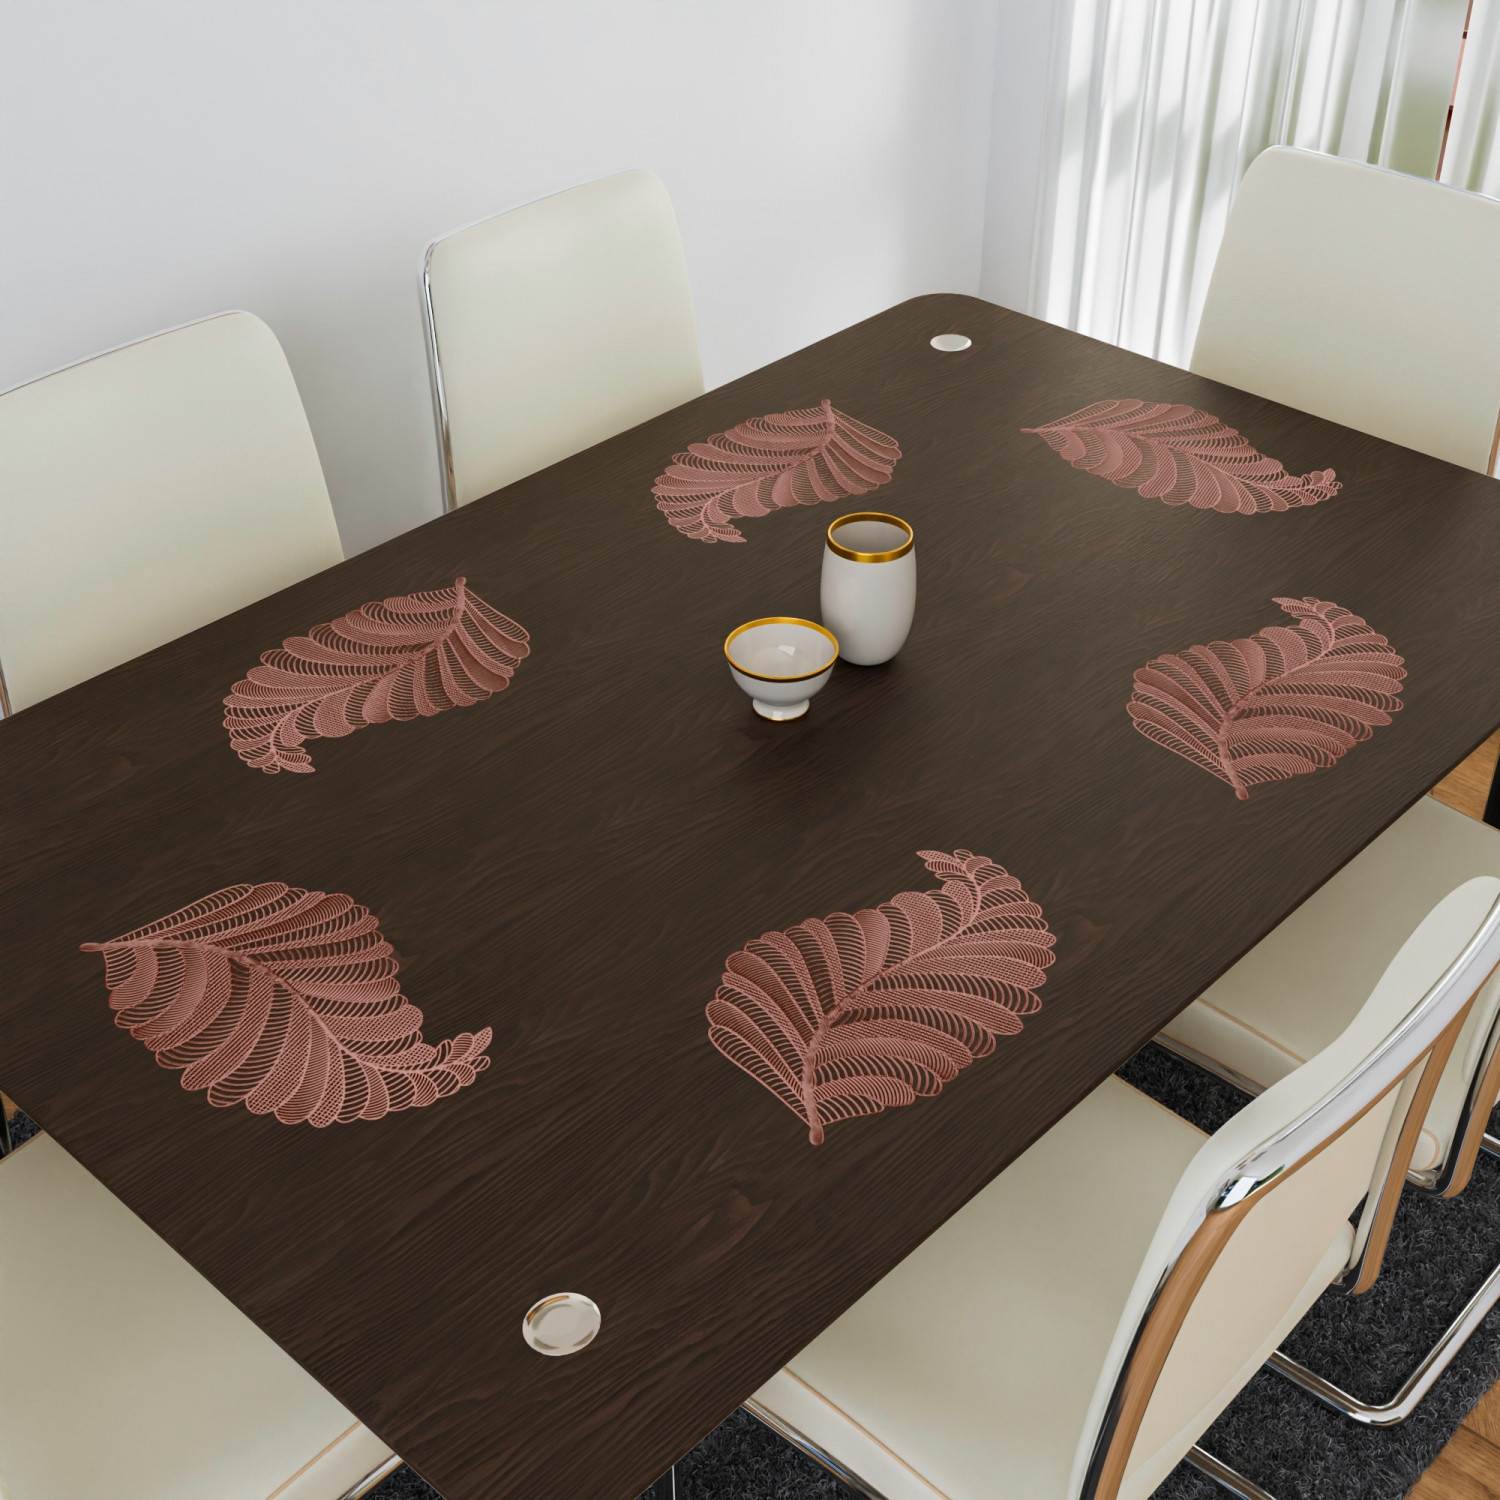 Kuber Industries Placemat | Placemats for Dining Room | Designer Table Mat Set | Placemats for Kitchen Table | Side Table Placemats | Leaf Shape Placemat |Copper